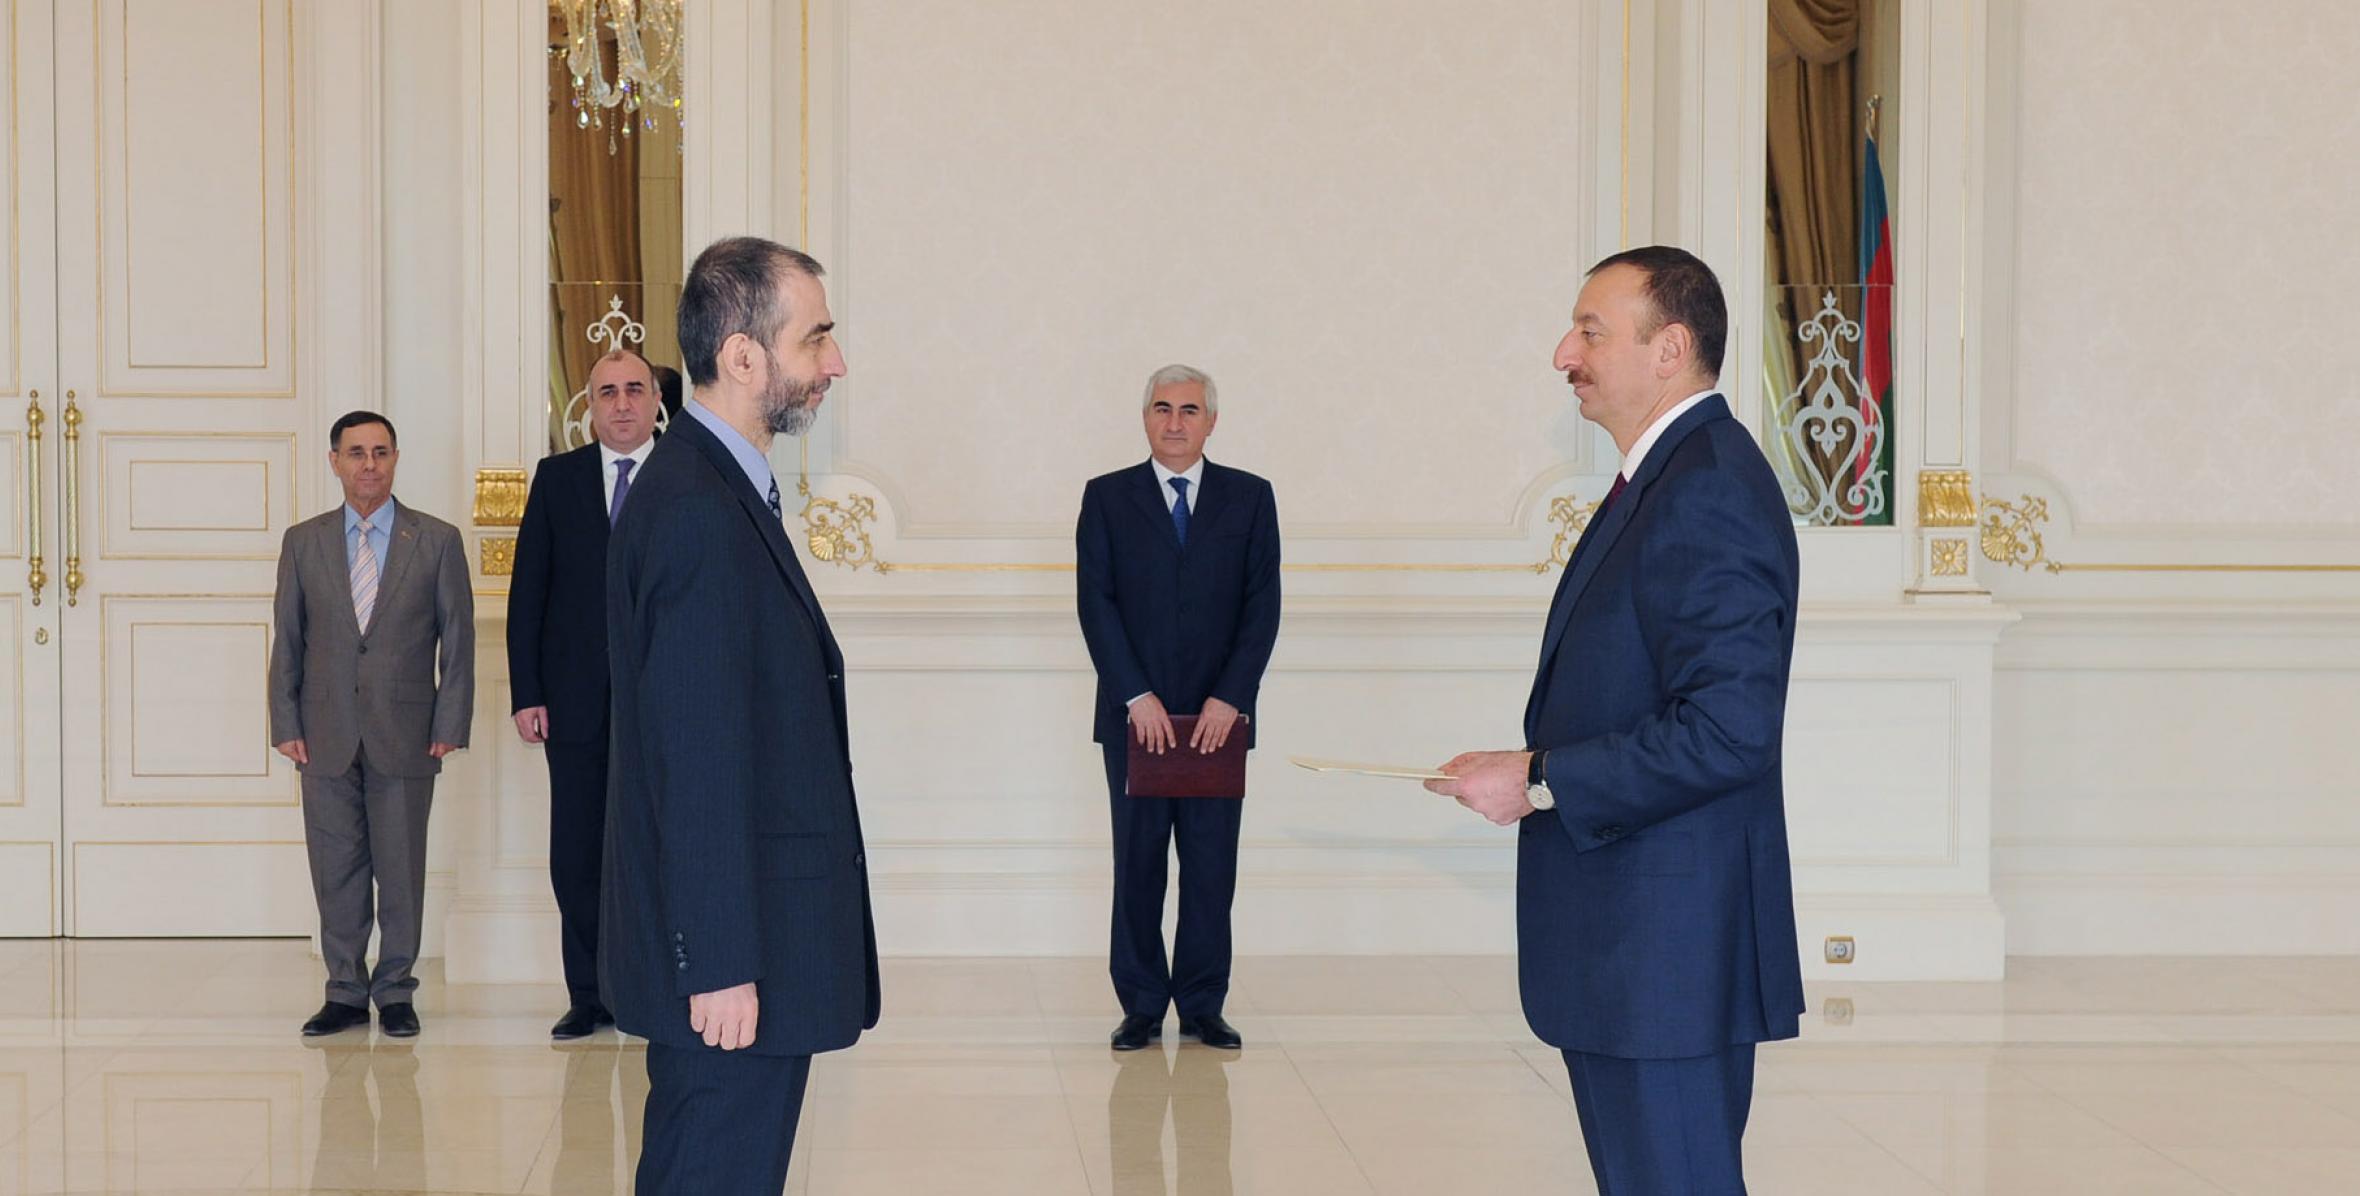 Ilham Aliyev accepted the credentials of a newly-appointed Ambassador of Slovenia to Azerbaijan